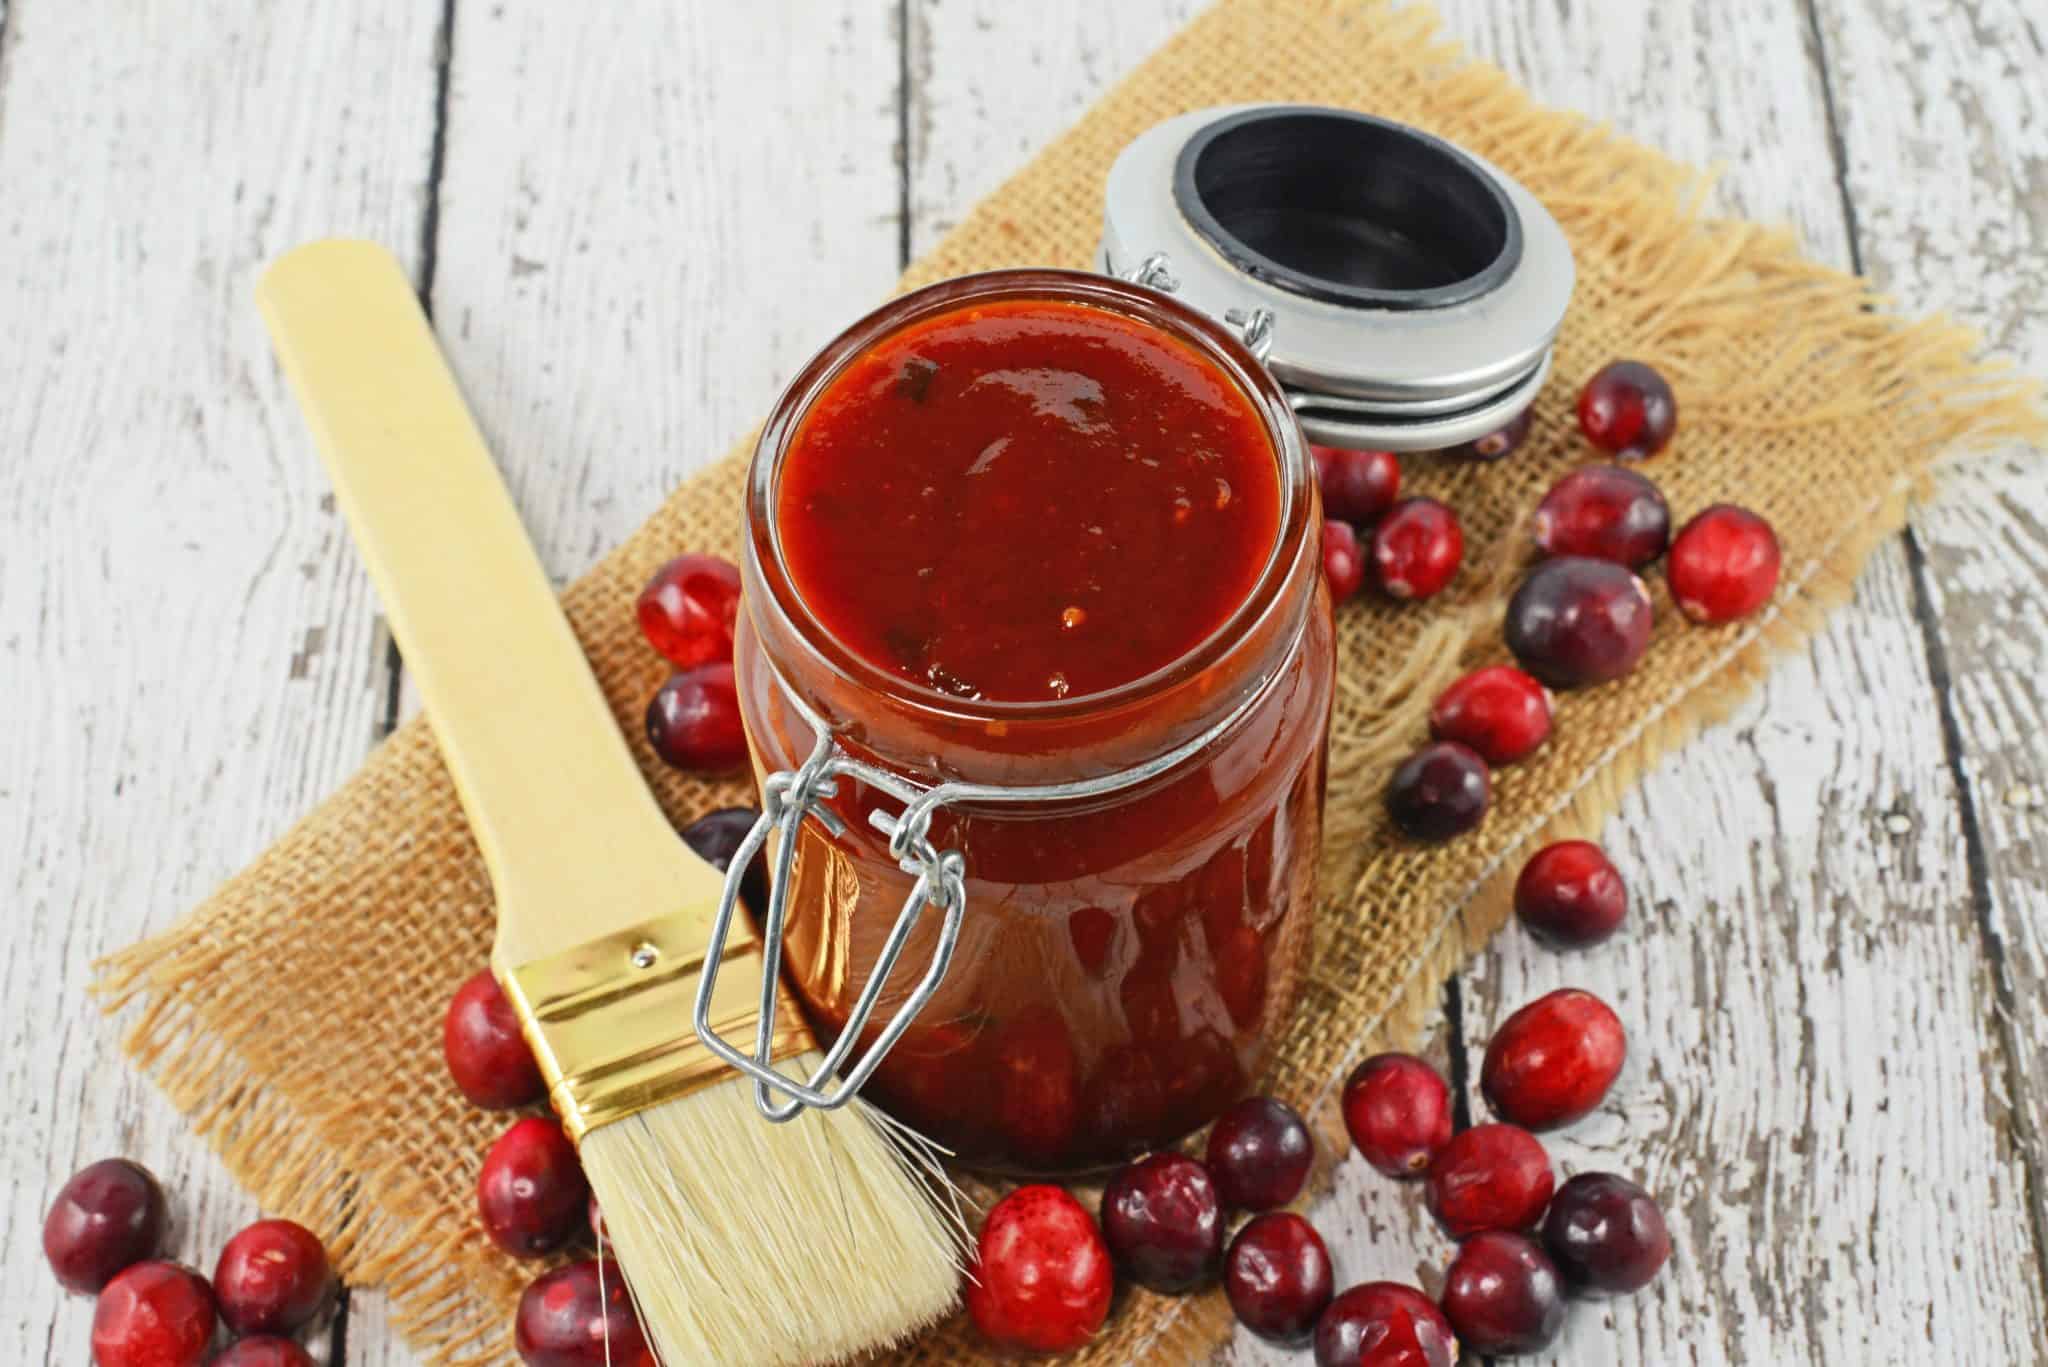 Cran Blueberry BBQ is a zesty sauce for grilled chicken, seafood or even vegetables. Sweet with a little bit of tang and a spike of coffee.